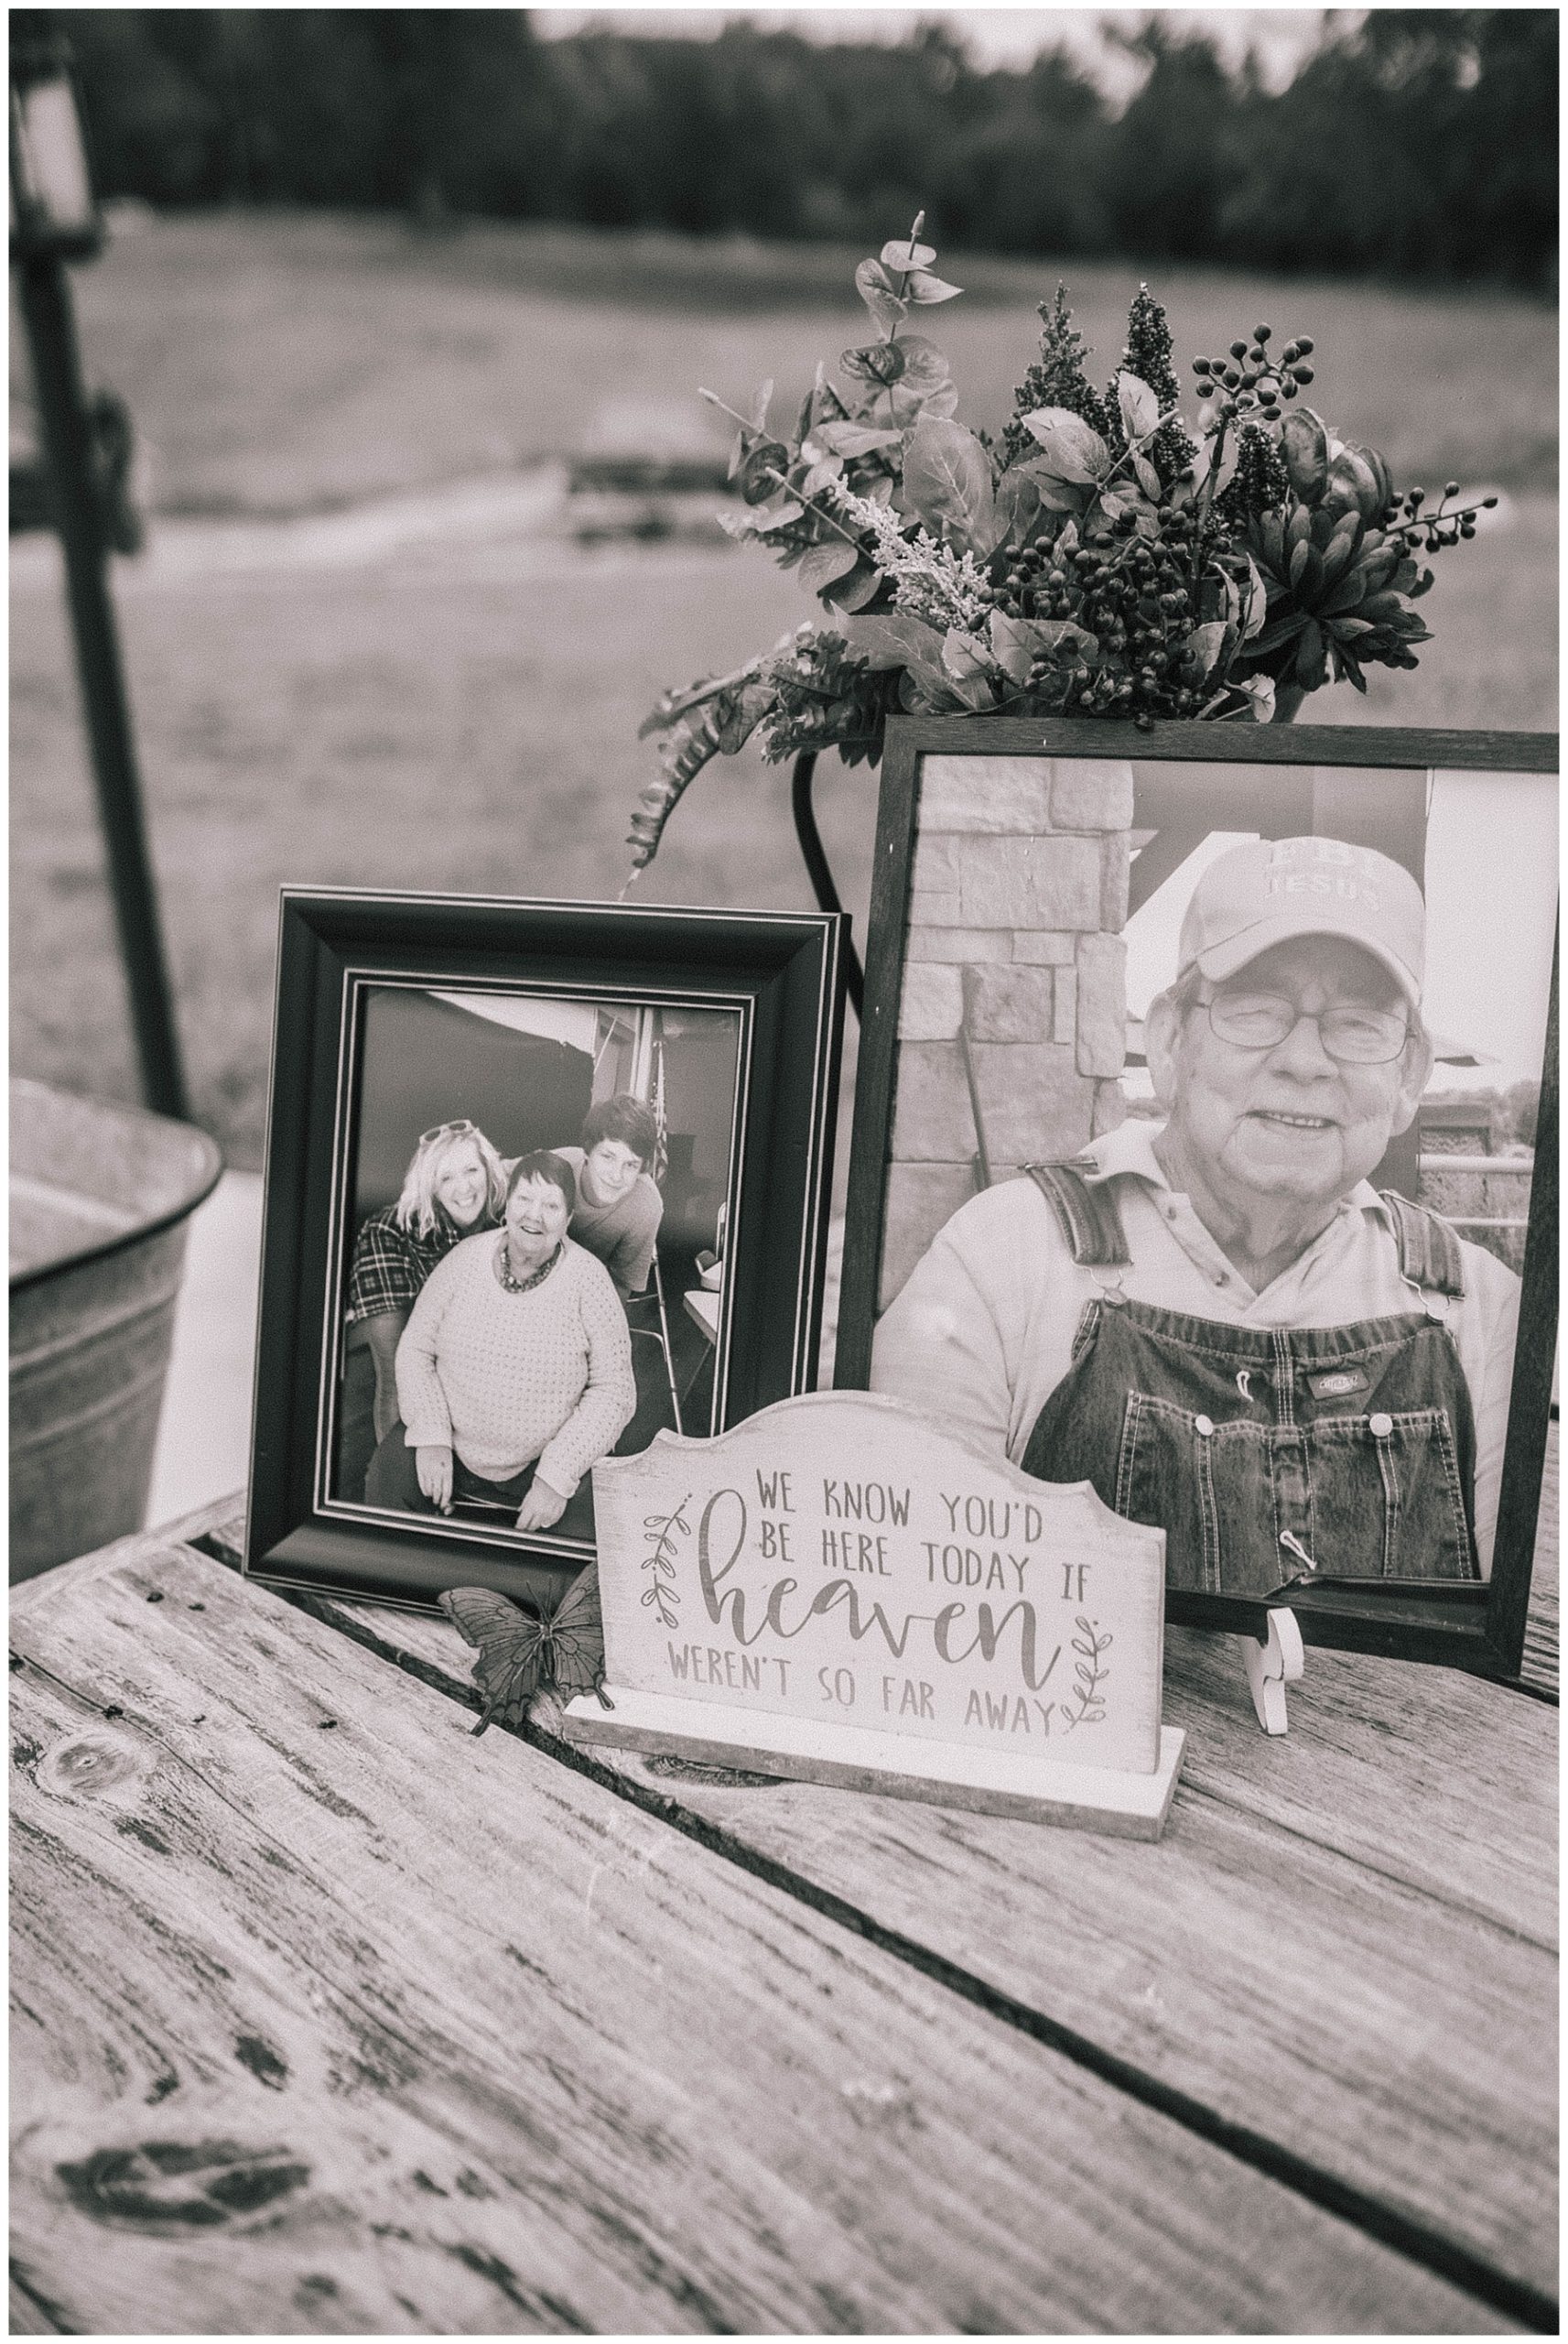 pictures of family that passed away and couldn't be at wedding, if heaven weren't so far away wedding decor